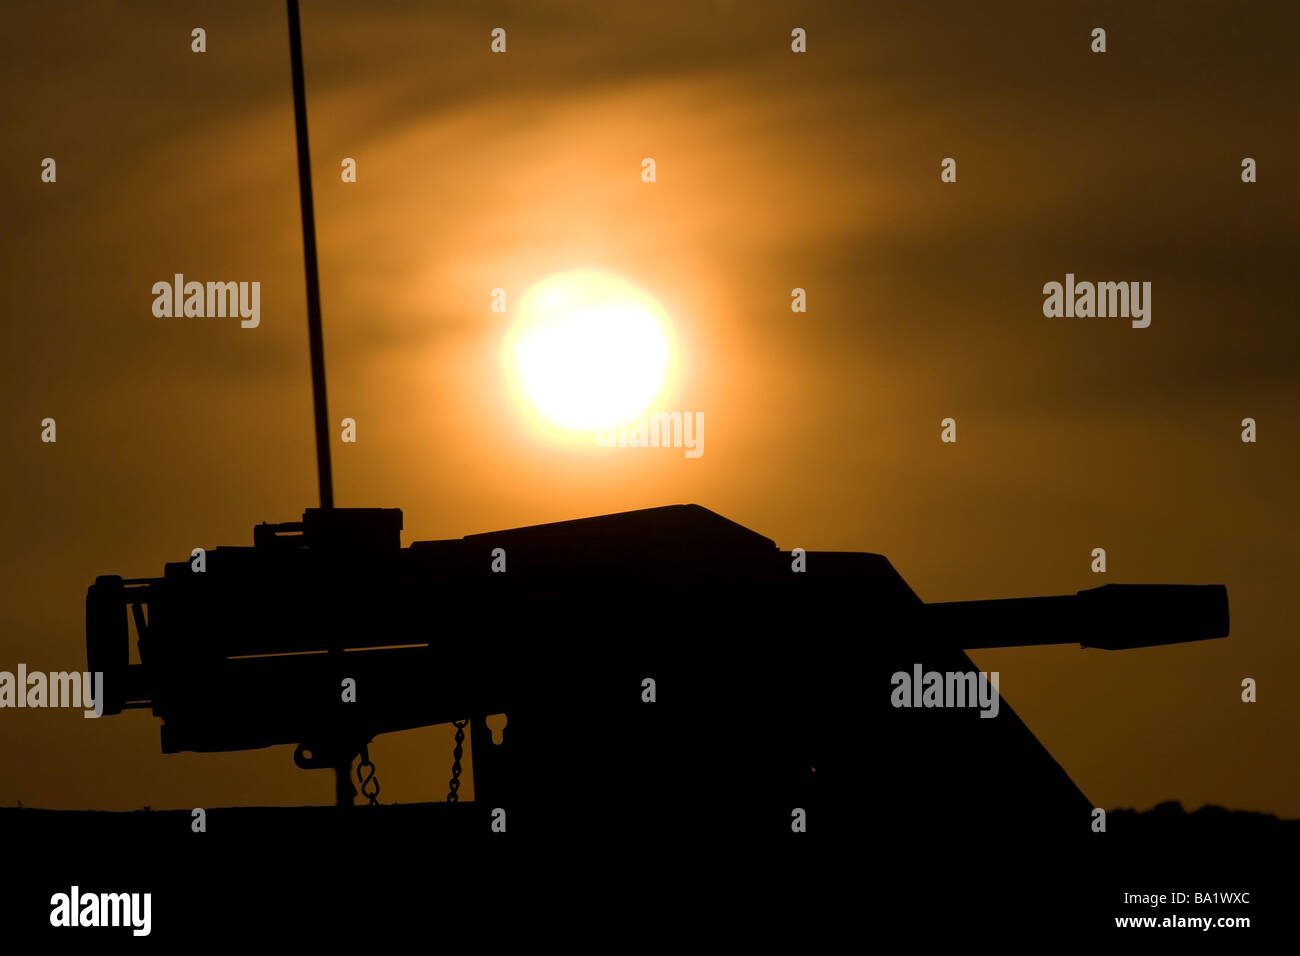 Baqubah, Iraq - Silhouette of a Mk 19 automatic grenade launcher. Stock Photo